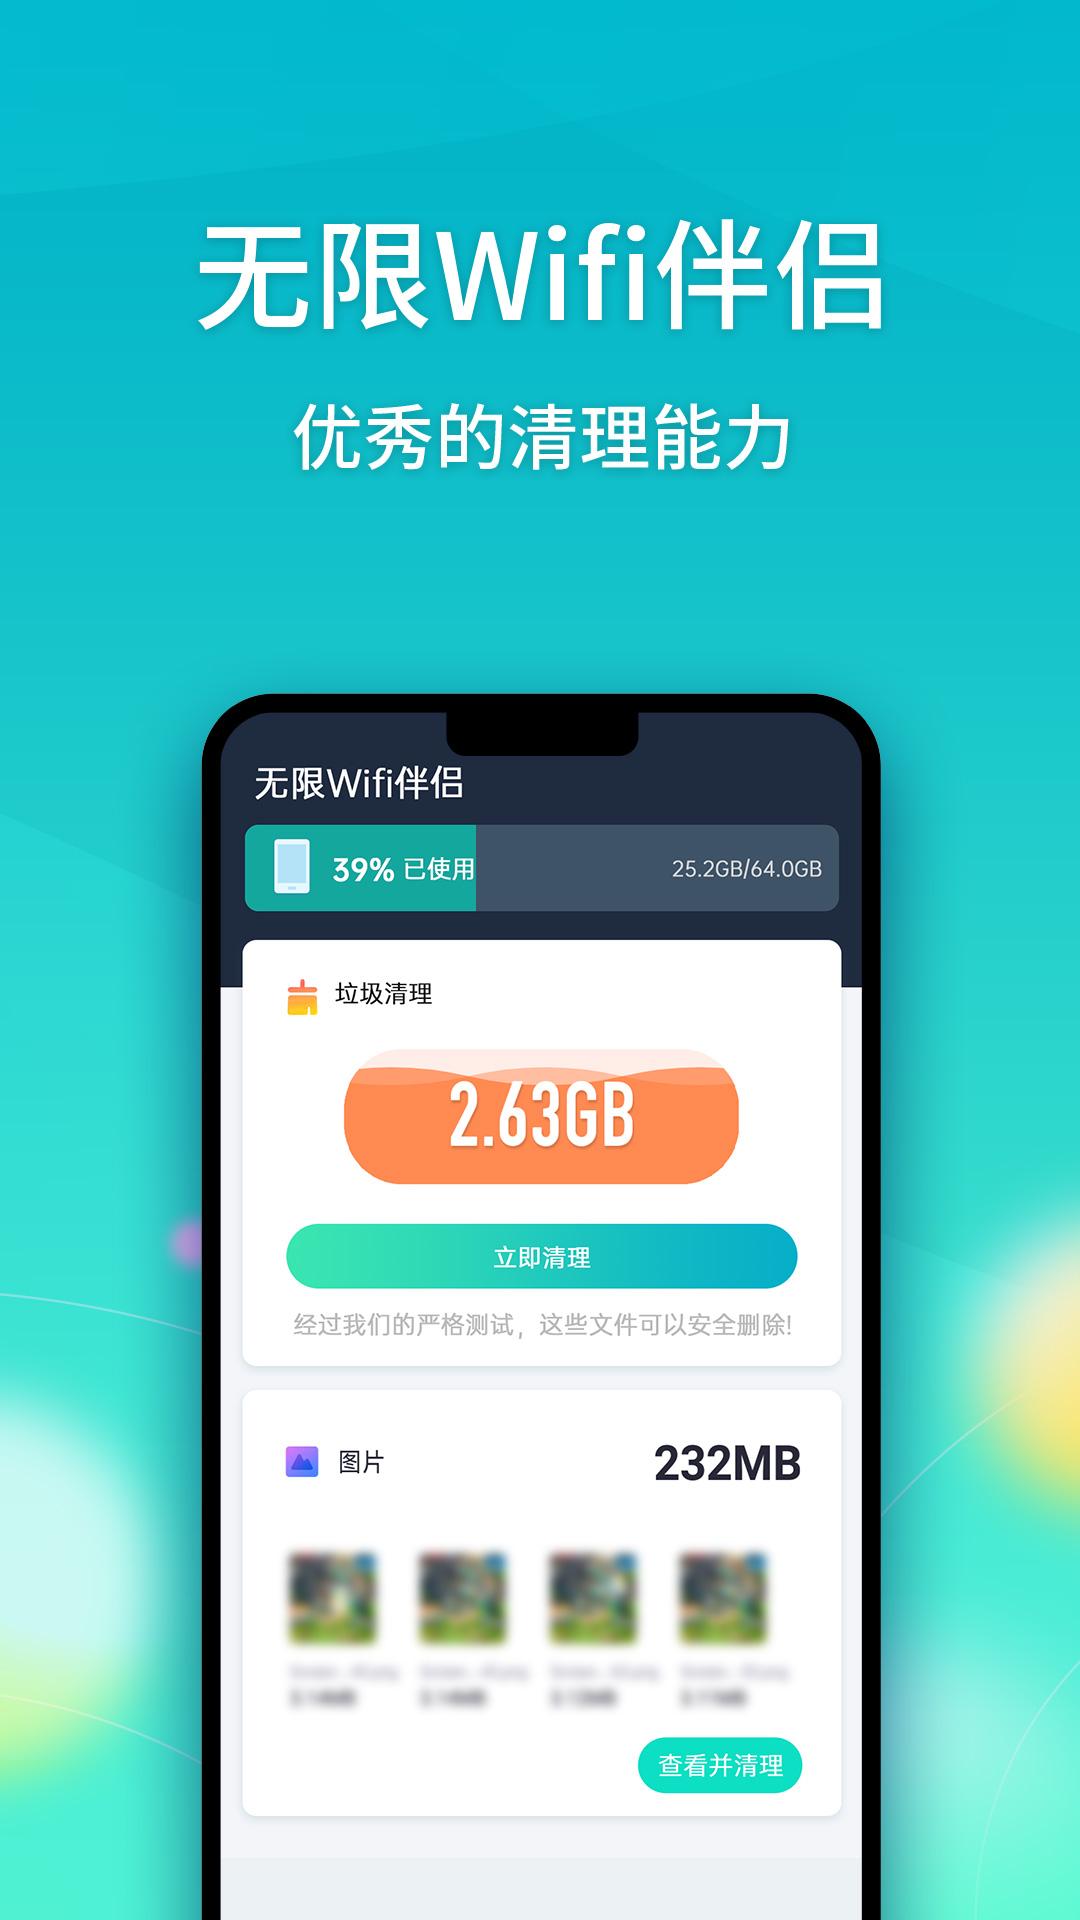 WifiappѰv1.1.62 ٷ